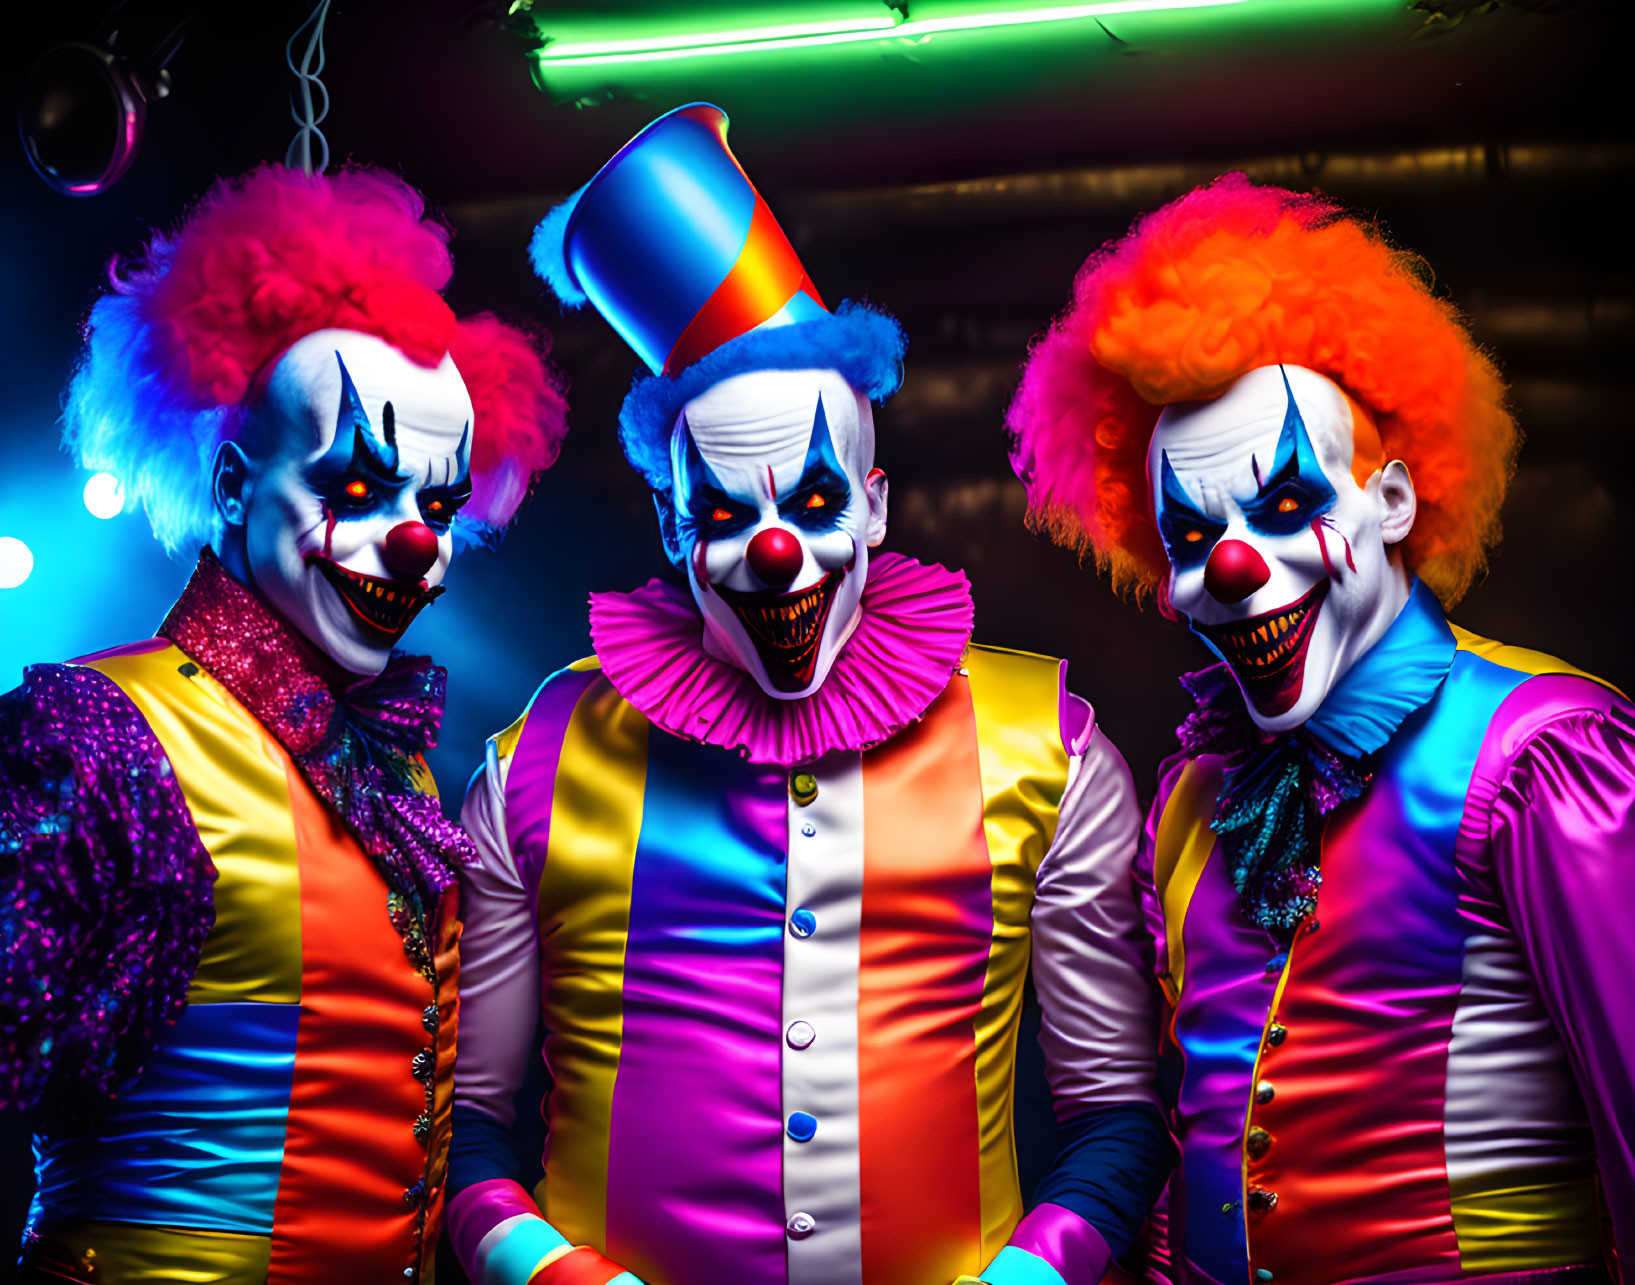 Colorful clown trio in vibrant outfits and makeup on dark backdrop